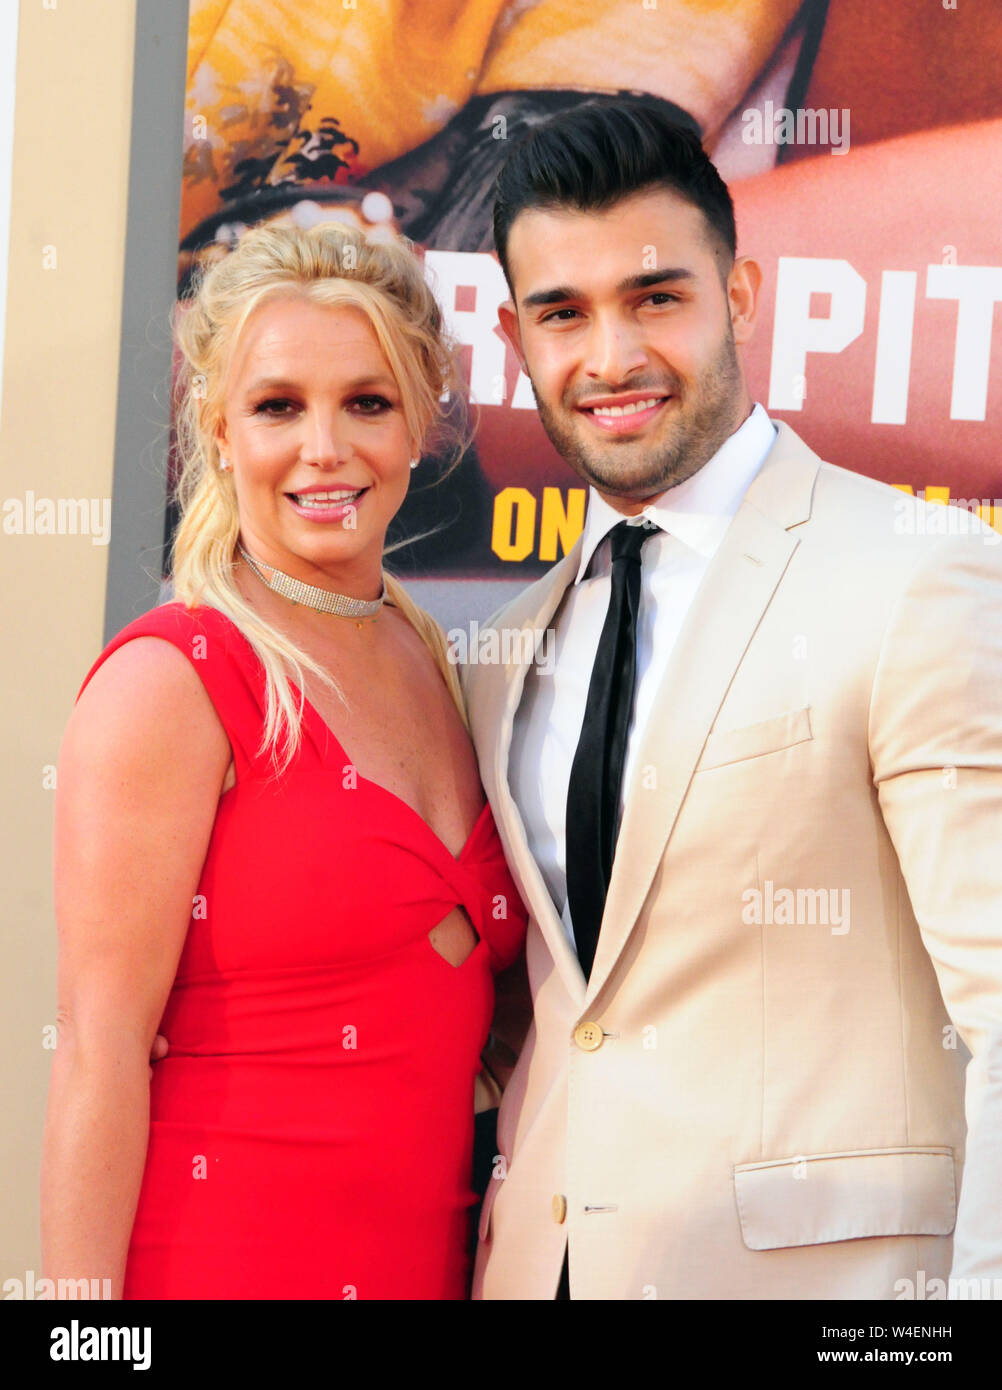 Hollywood, California, USA 22nd July 2019 Singer Britney Spears and boyfriend trainer Sam Asghari attend Sony Pictures Presents the World Premiere of 'Once Upon A Time...In Hollywood' on July 22, 2019 at TCL Chinese Theatre in Hollywood, California, USA. Photo by Barry King/Alamy Live News Stock Photo